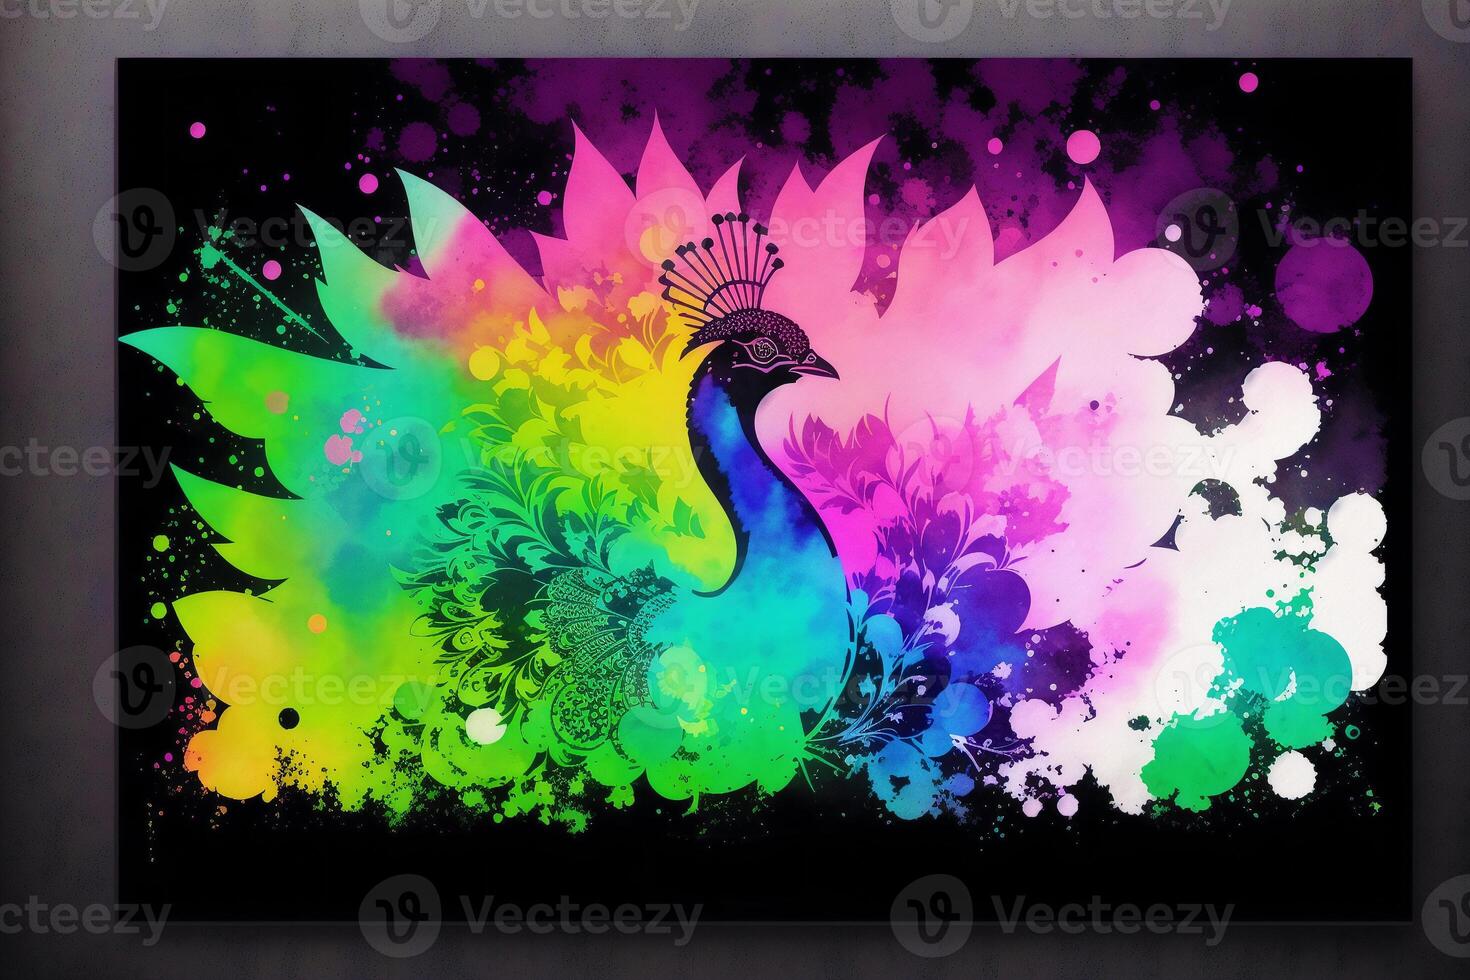 Illustration of a peacock on abstract watercolor background. Watercolor paint. Digital art, photo